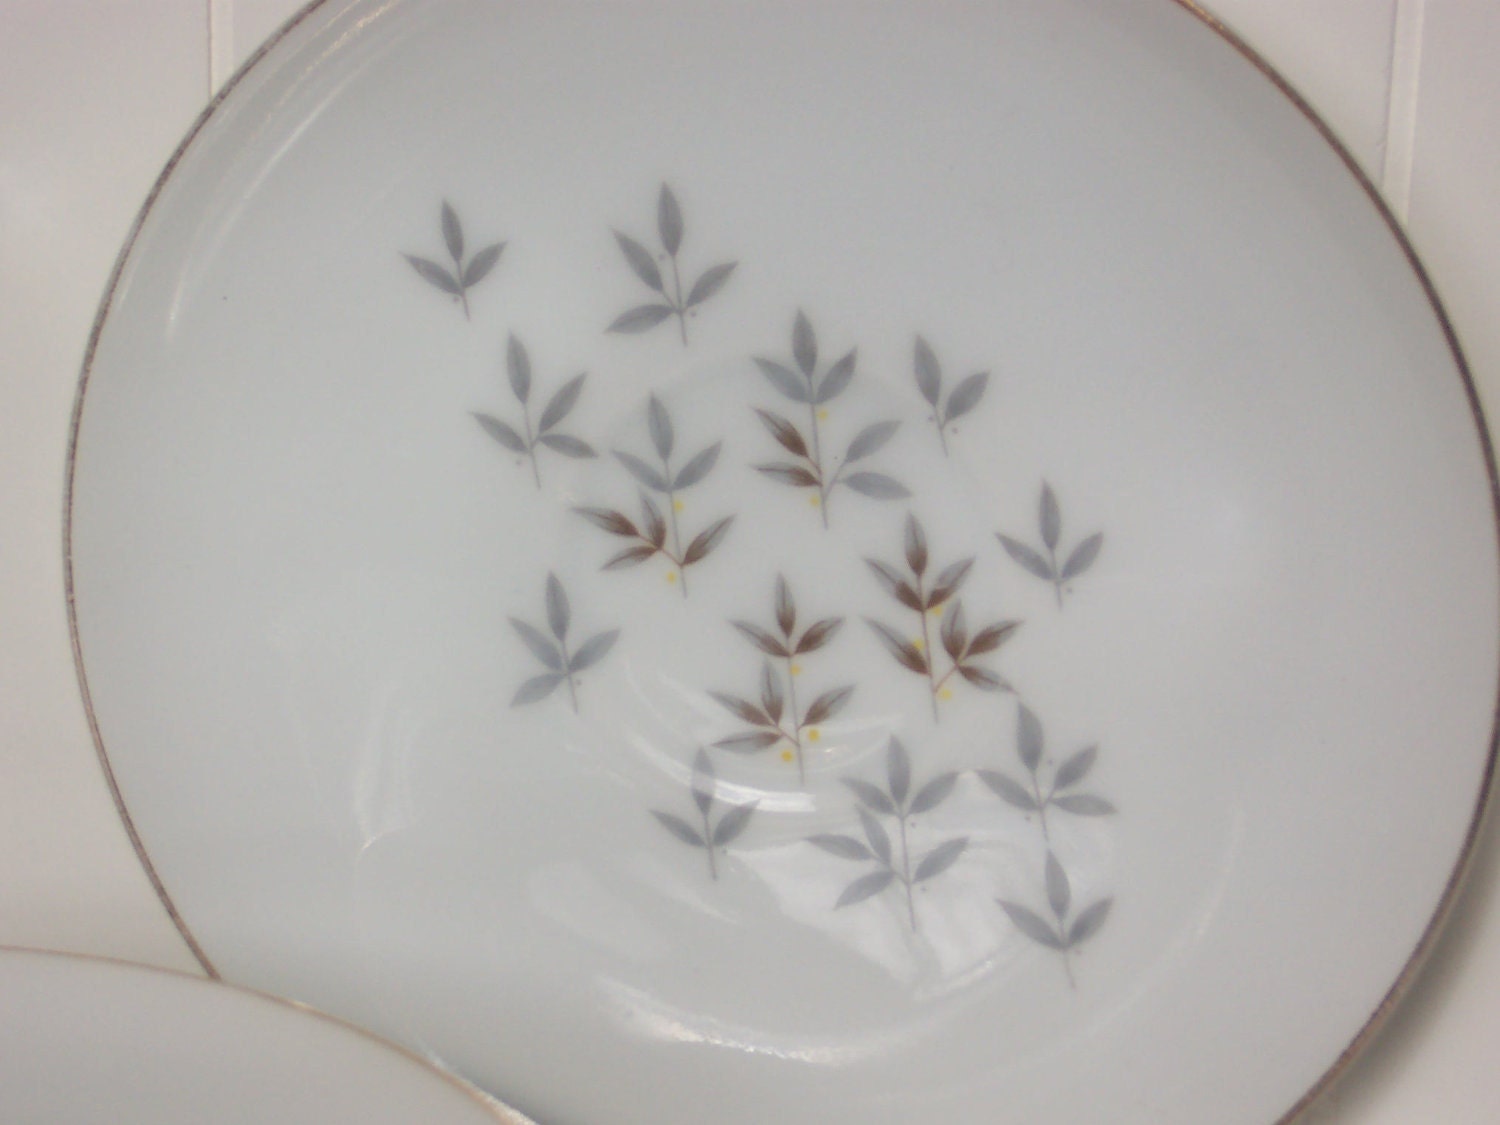 SALE - 7 vintage gray and yellow leaves design 6 inch saucers / small plates - FLIGHT pattern / Trend China / made in Japan - VintageOrphanage